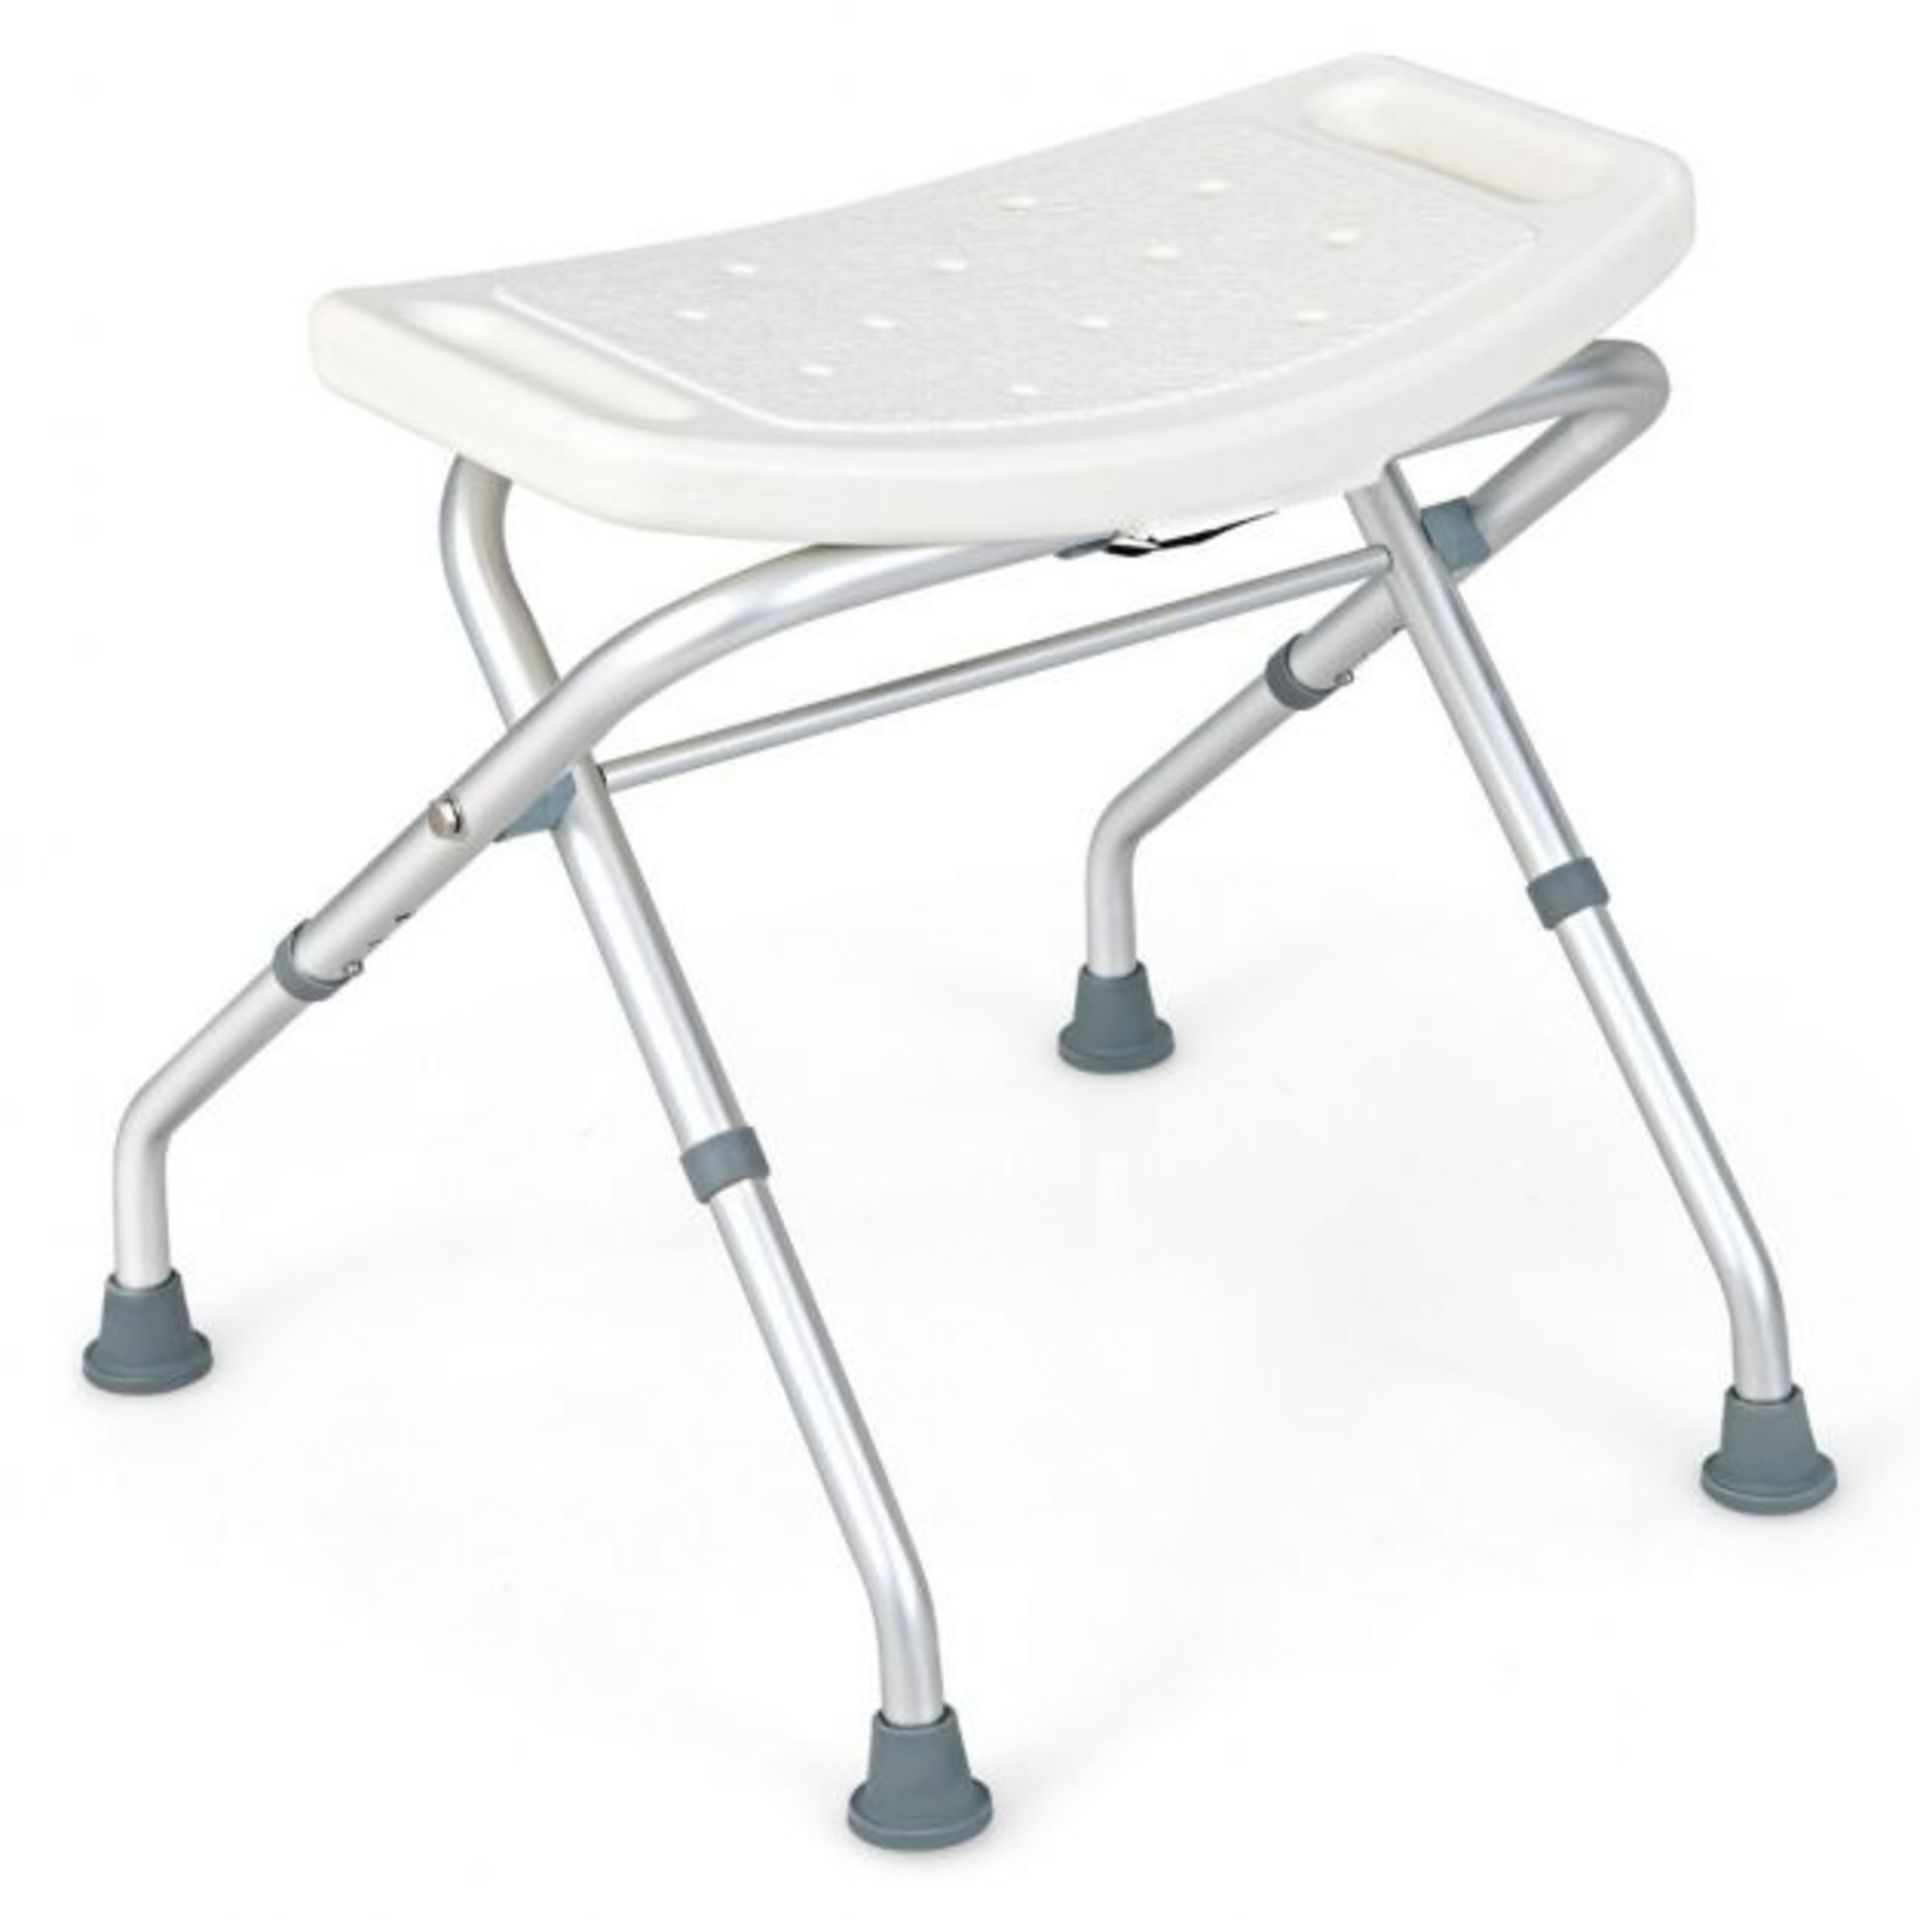 Folding Portable Shower Seat with Adjustable Height for Bathroom - ER53